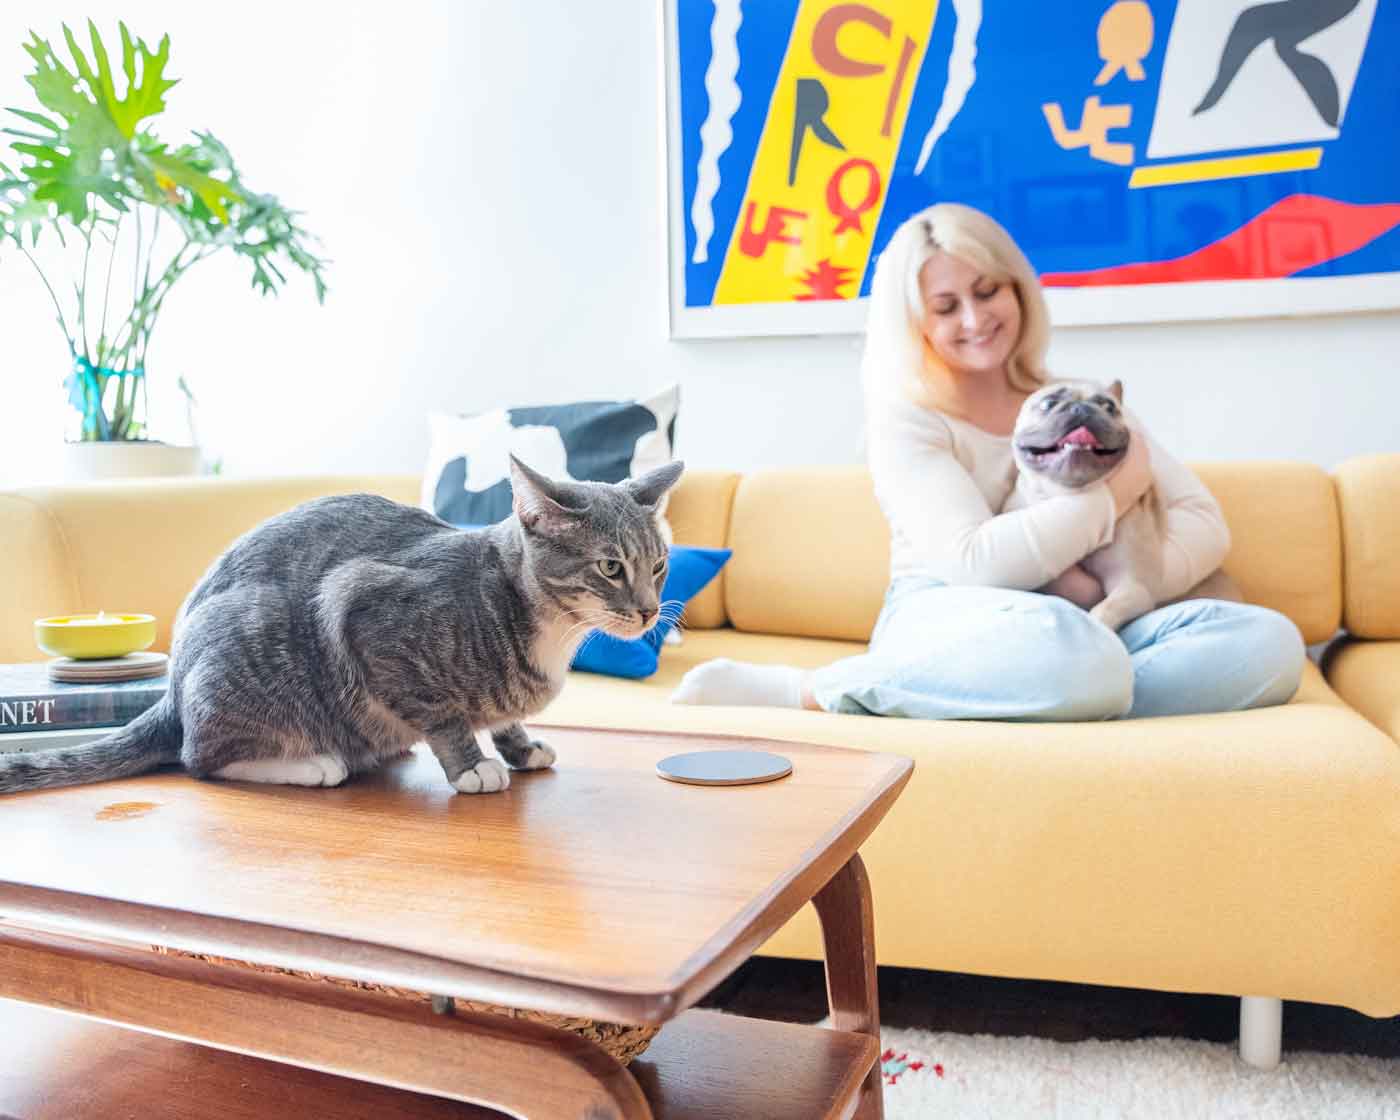 Woman-sitting-on-couch-with-her-pug-in-her-lap-and-kitty-on-the-coffee-table